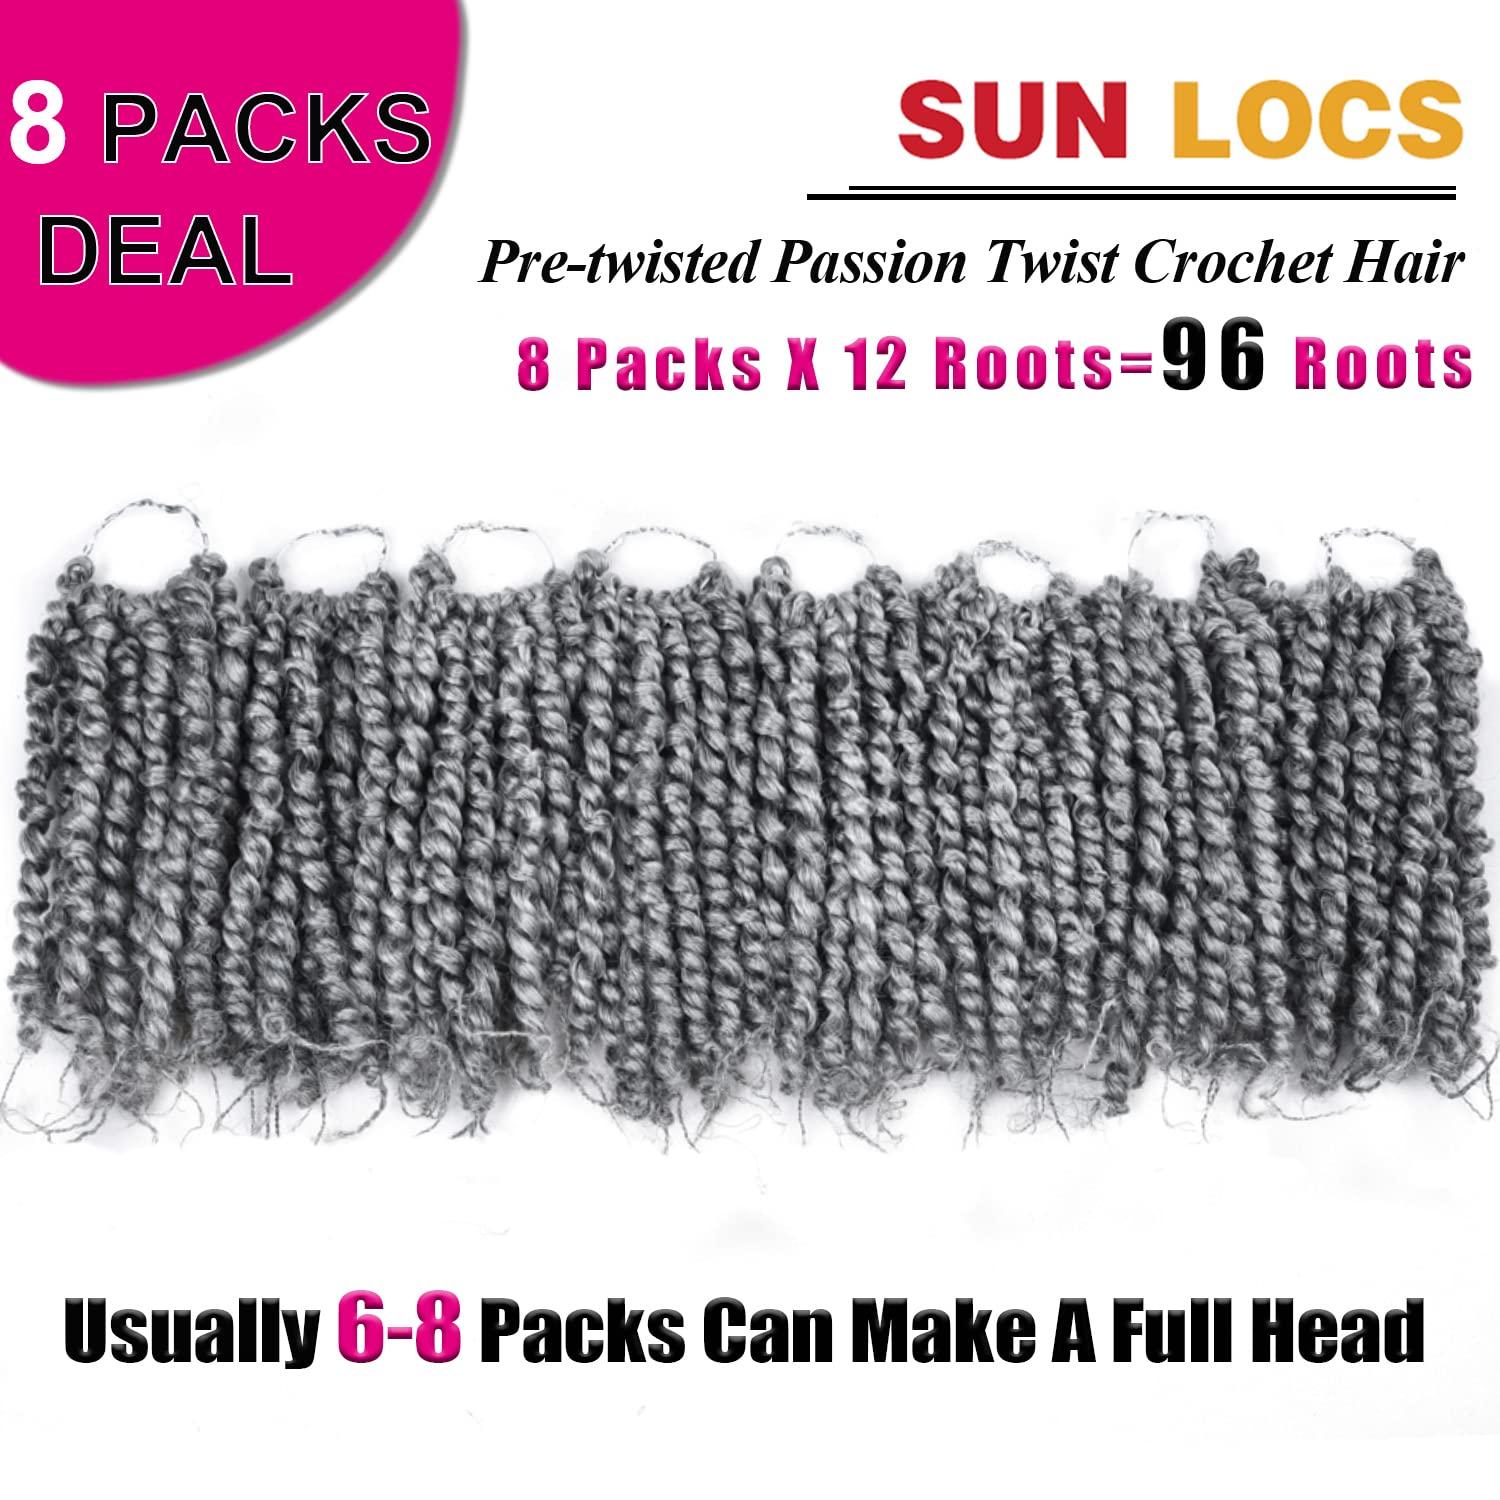 8 Packs Pre-twisted Passion Twist Crochet Hair for Black Women, 8